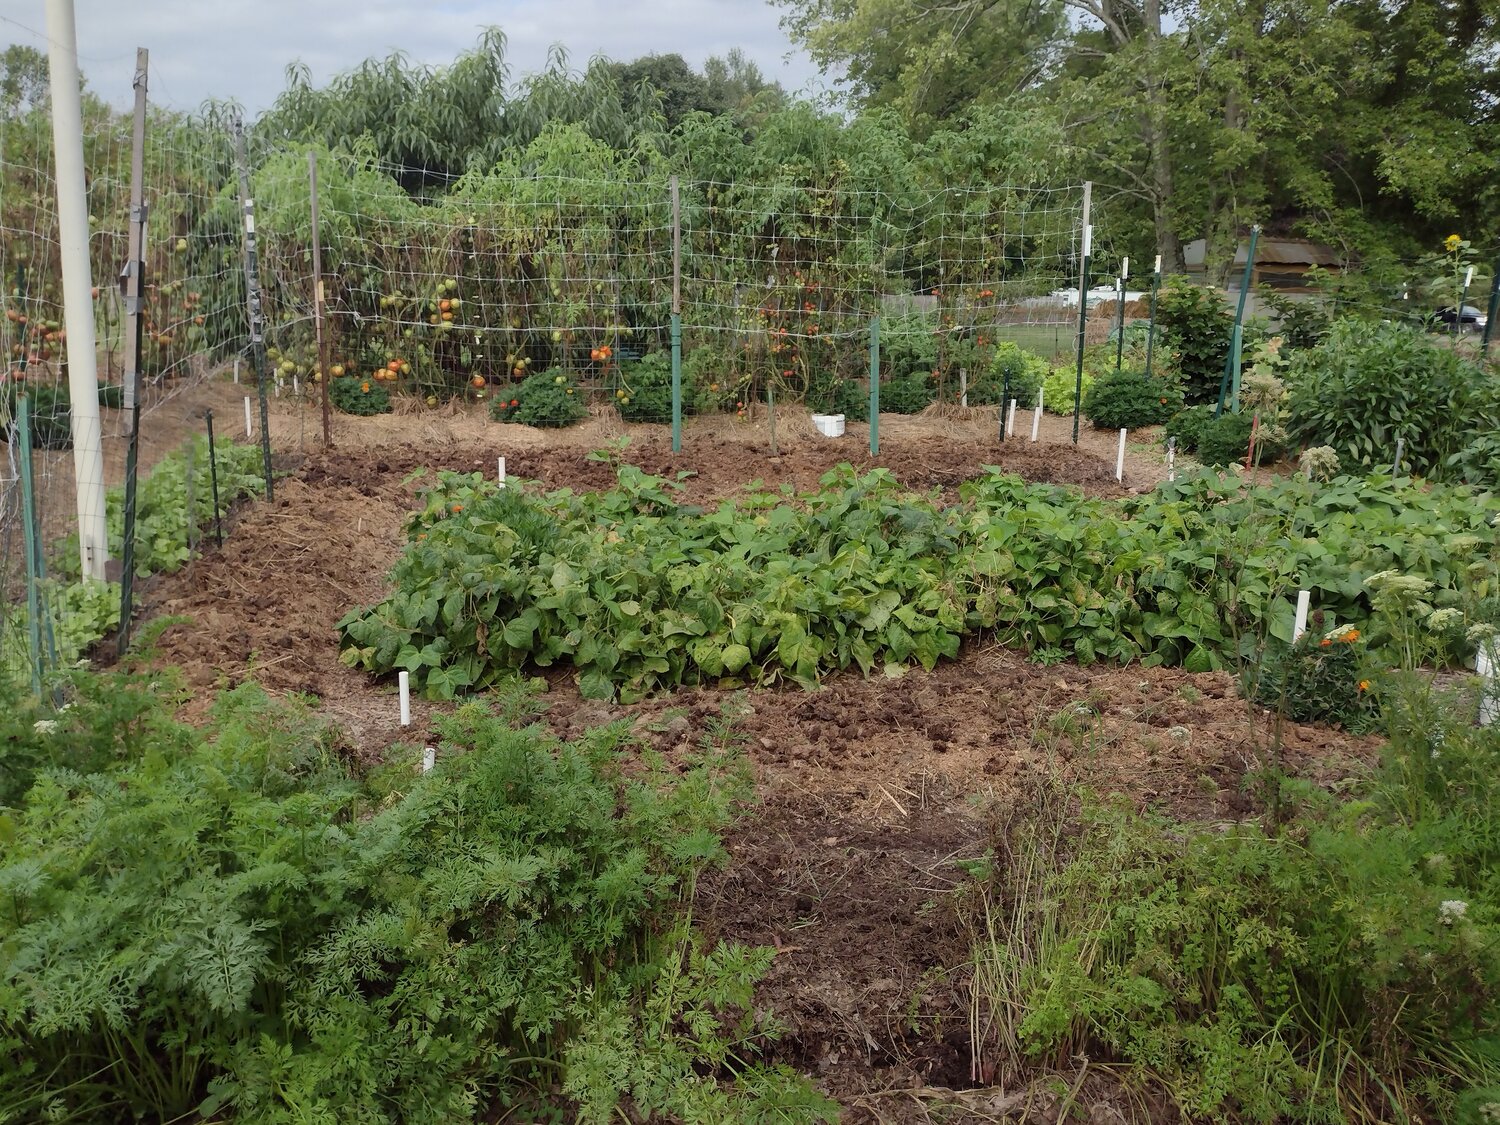 The Victory Garden’s maze-like layout keeps out animals too, because deer like to have a clear way in and out.